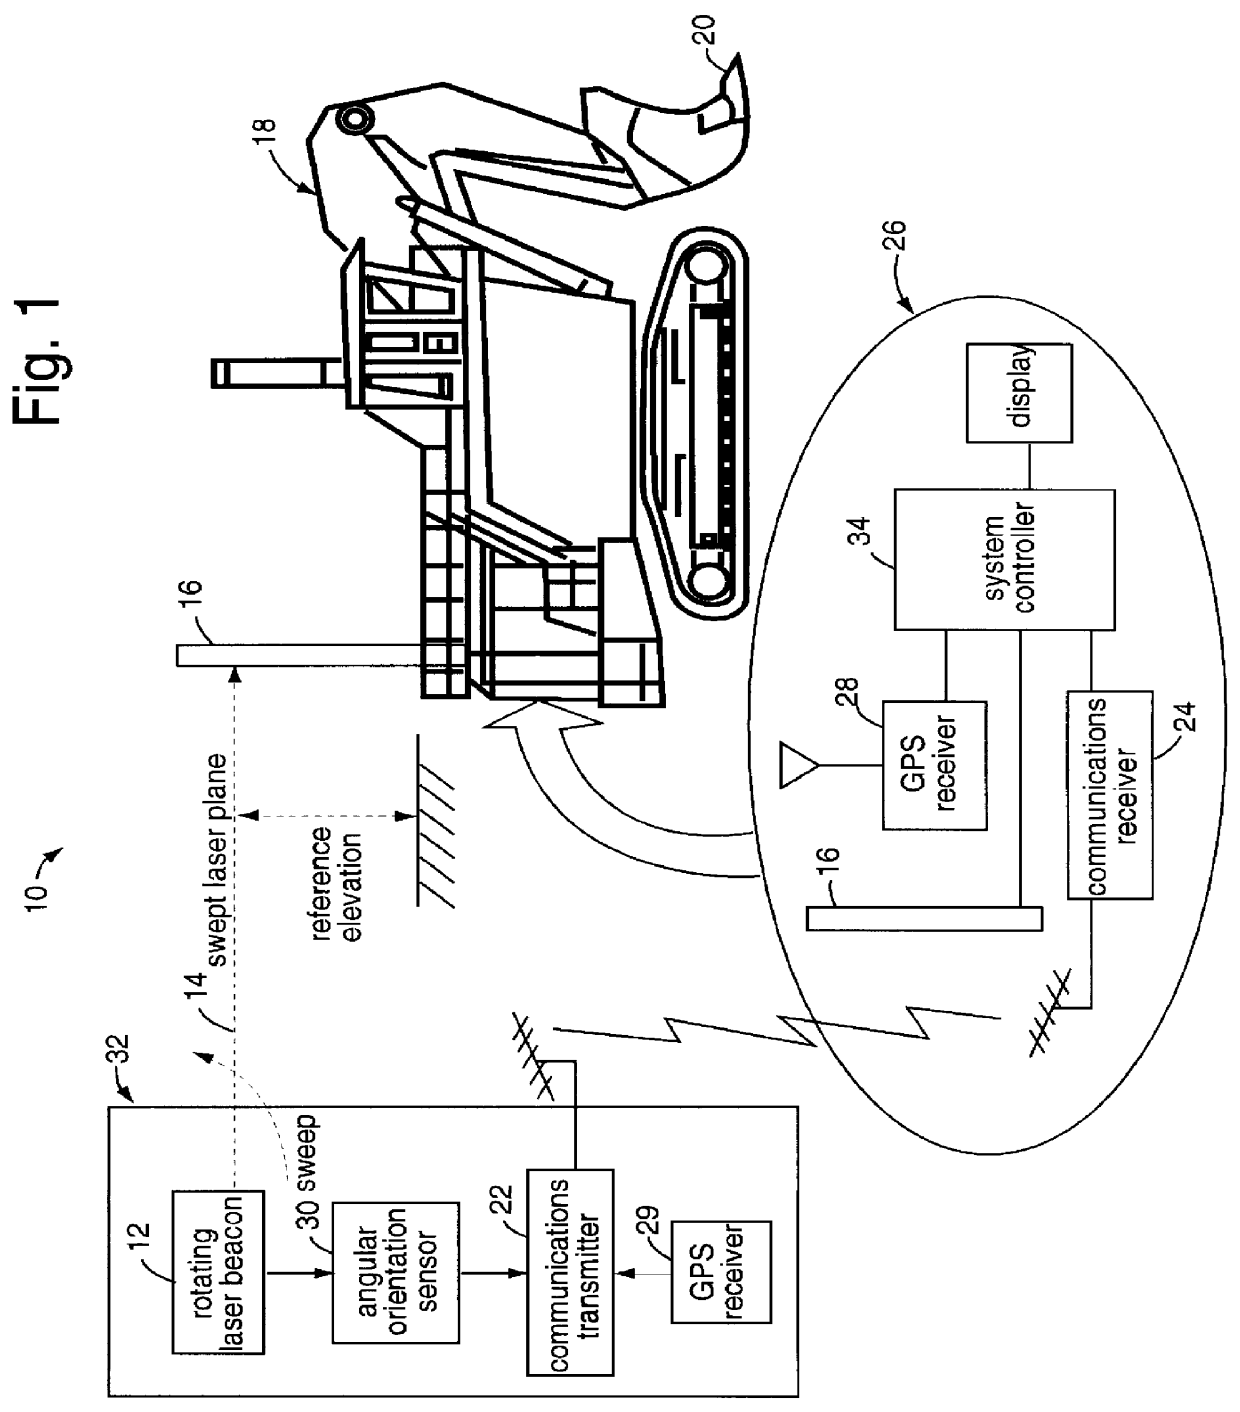 Multiple simultaneous laser-reference control system for construction equipment